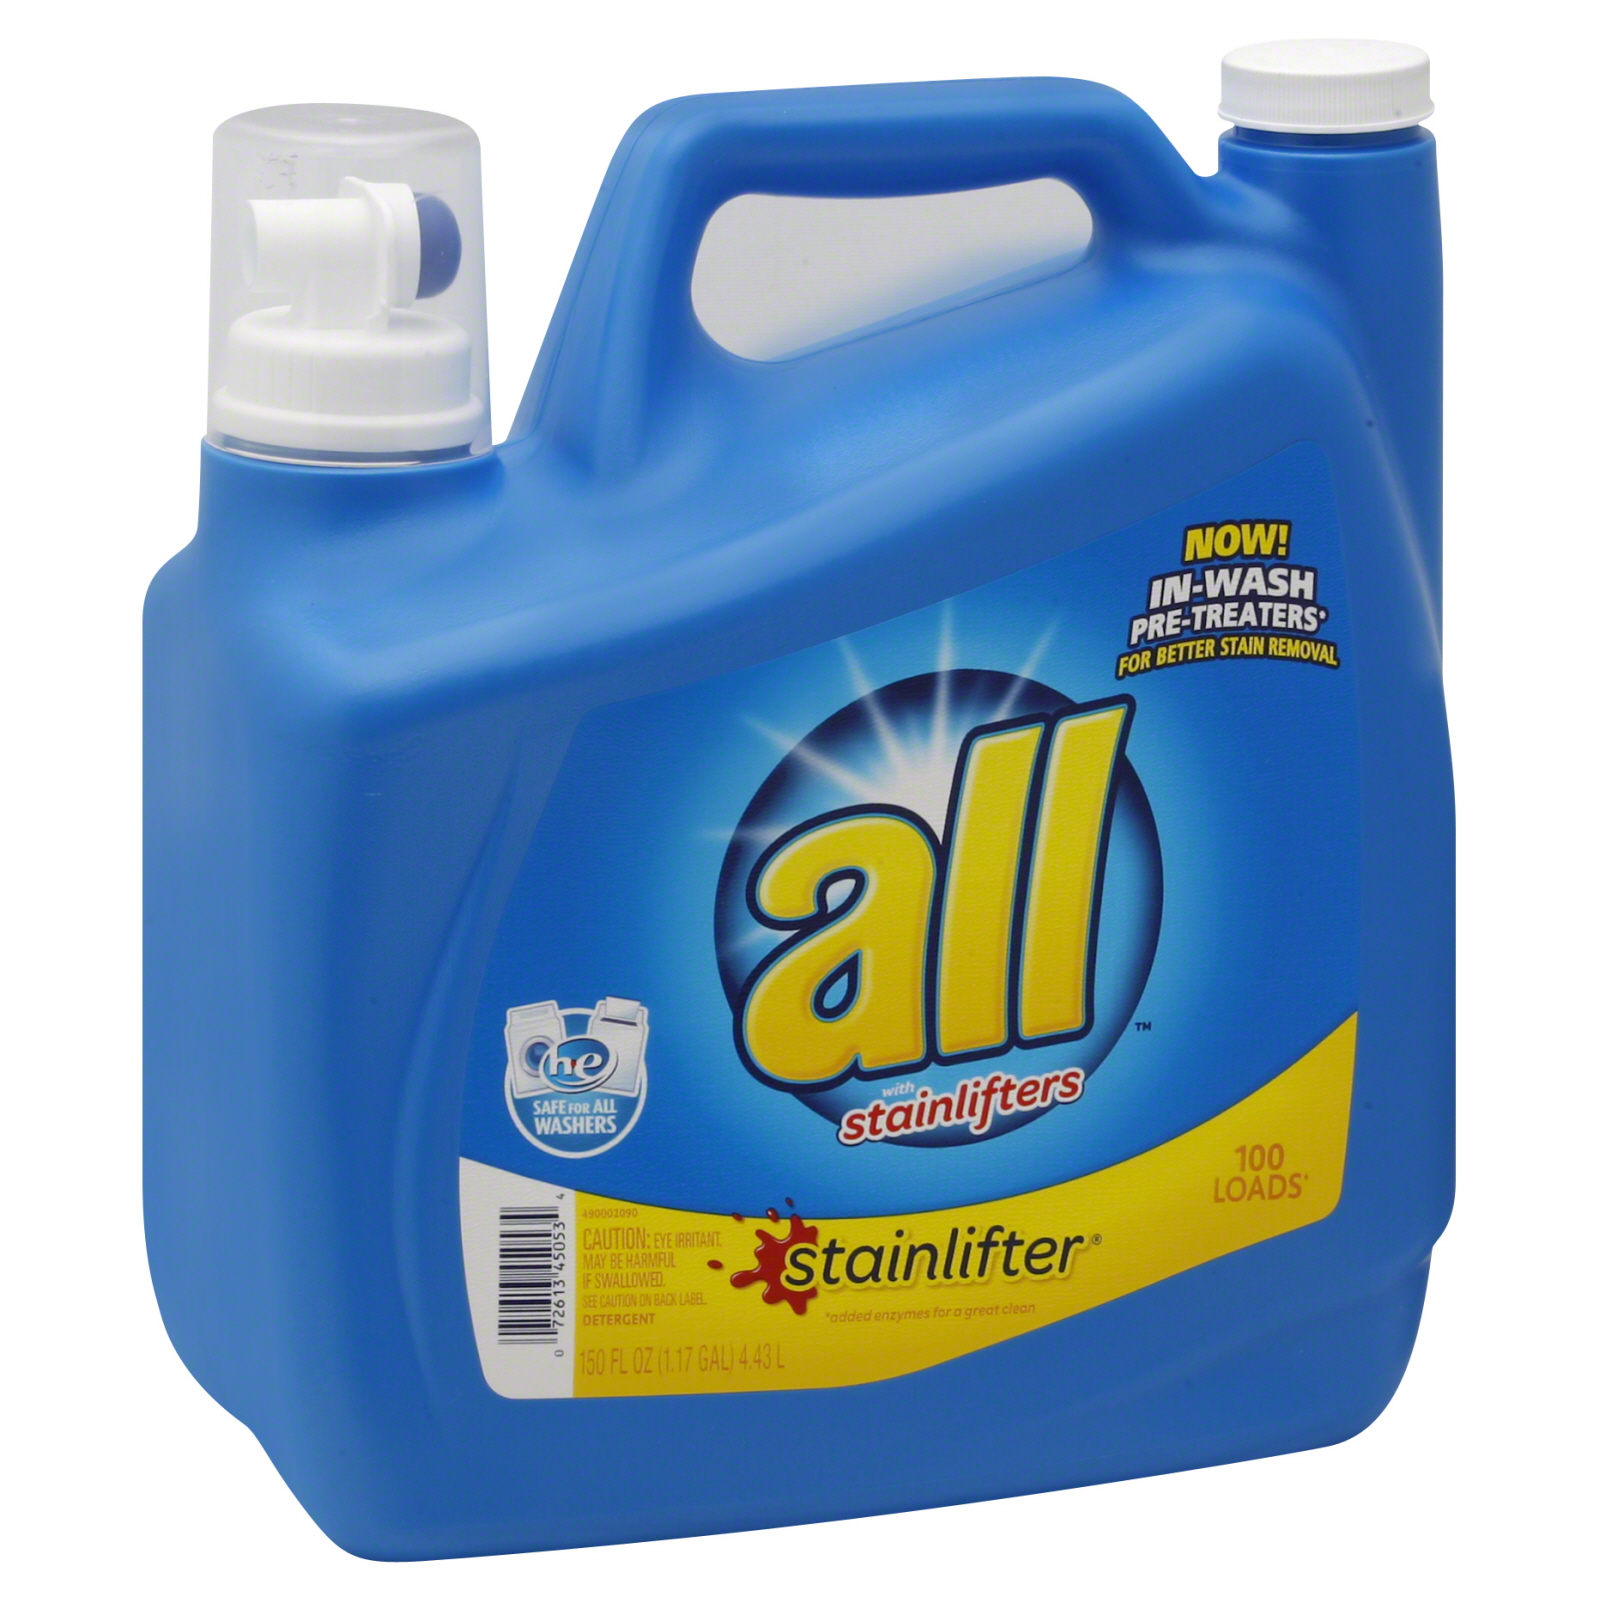 All Laundry Detergent, 2X Ultra Concentrated, Stainlifter, 150 fl oz (1.17 gl) 4.43 lt